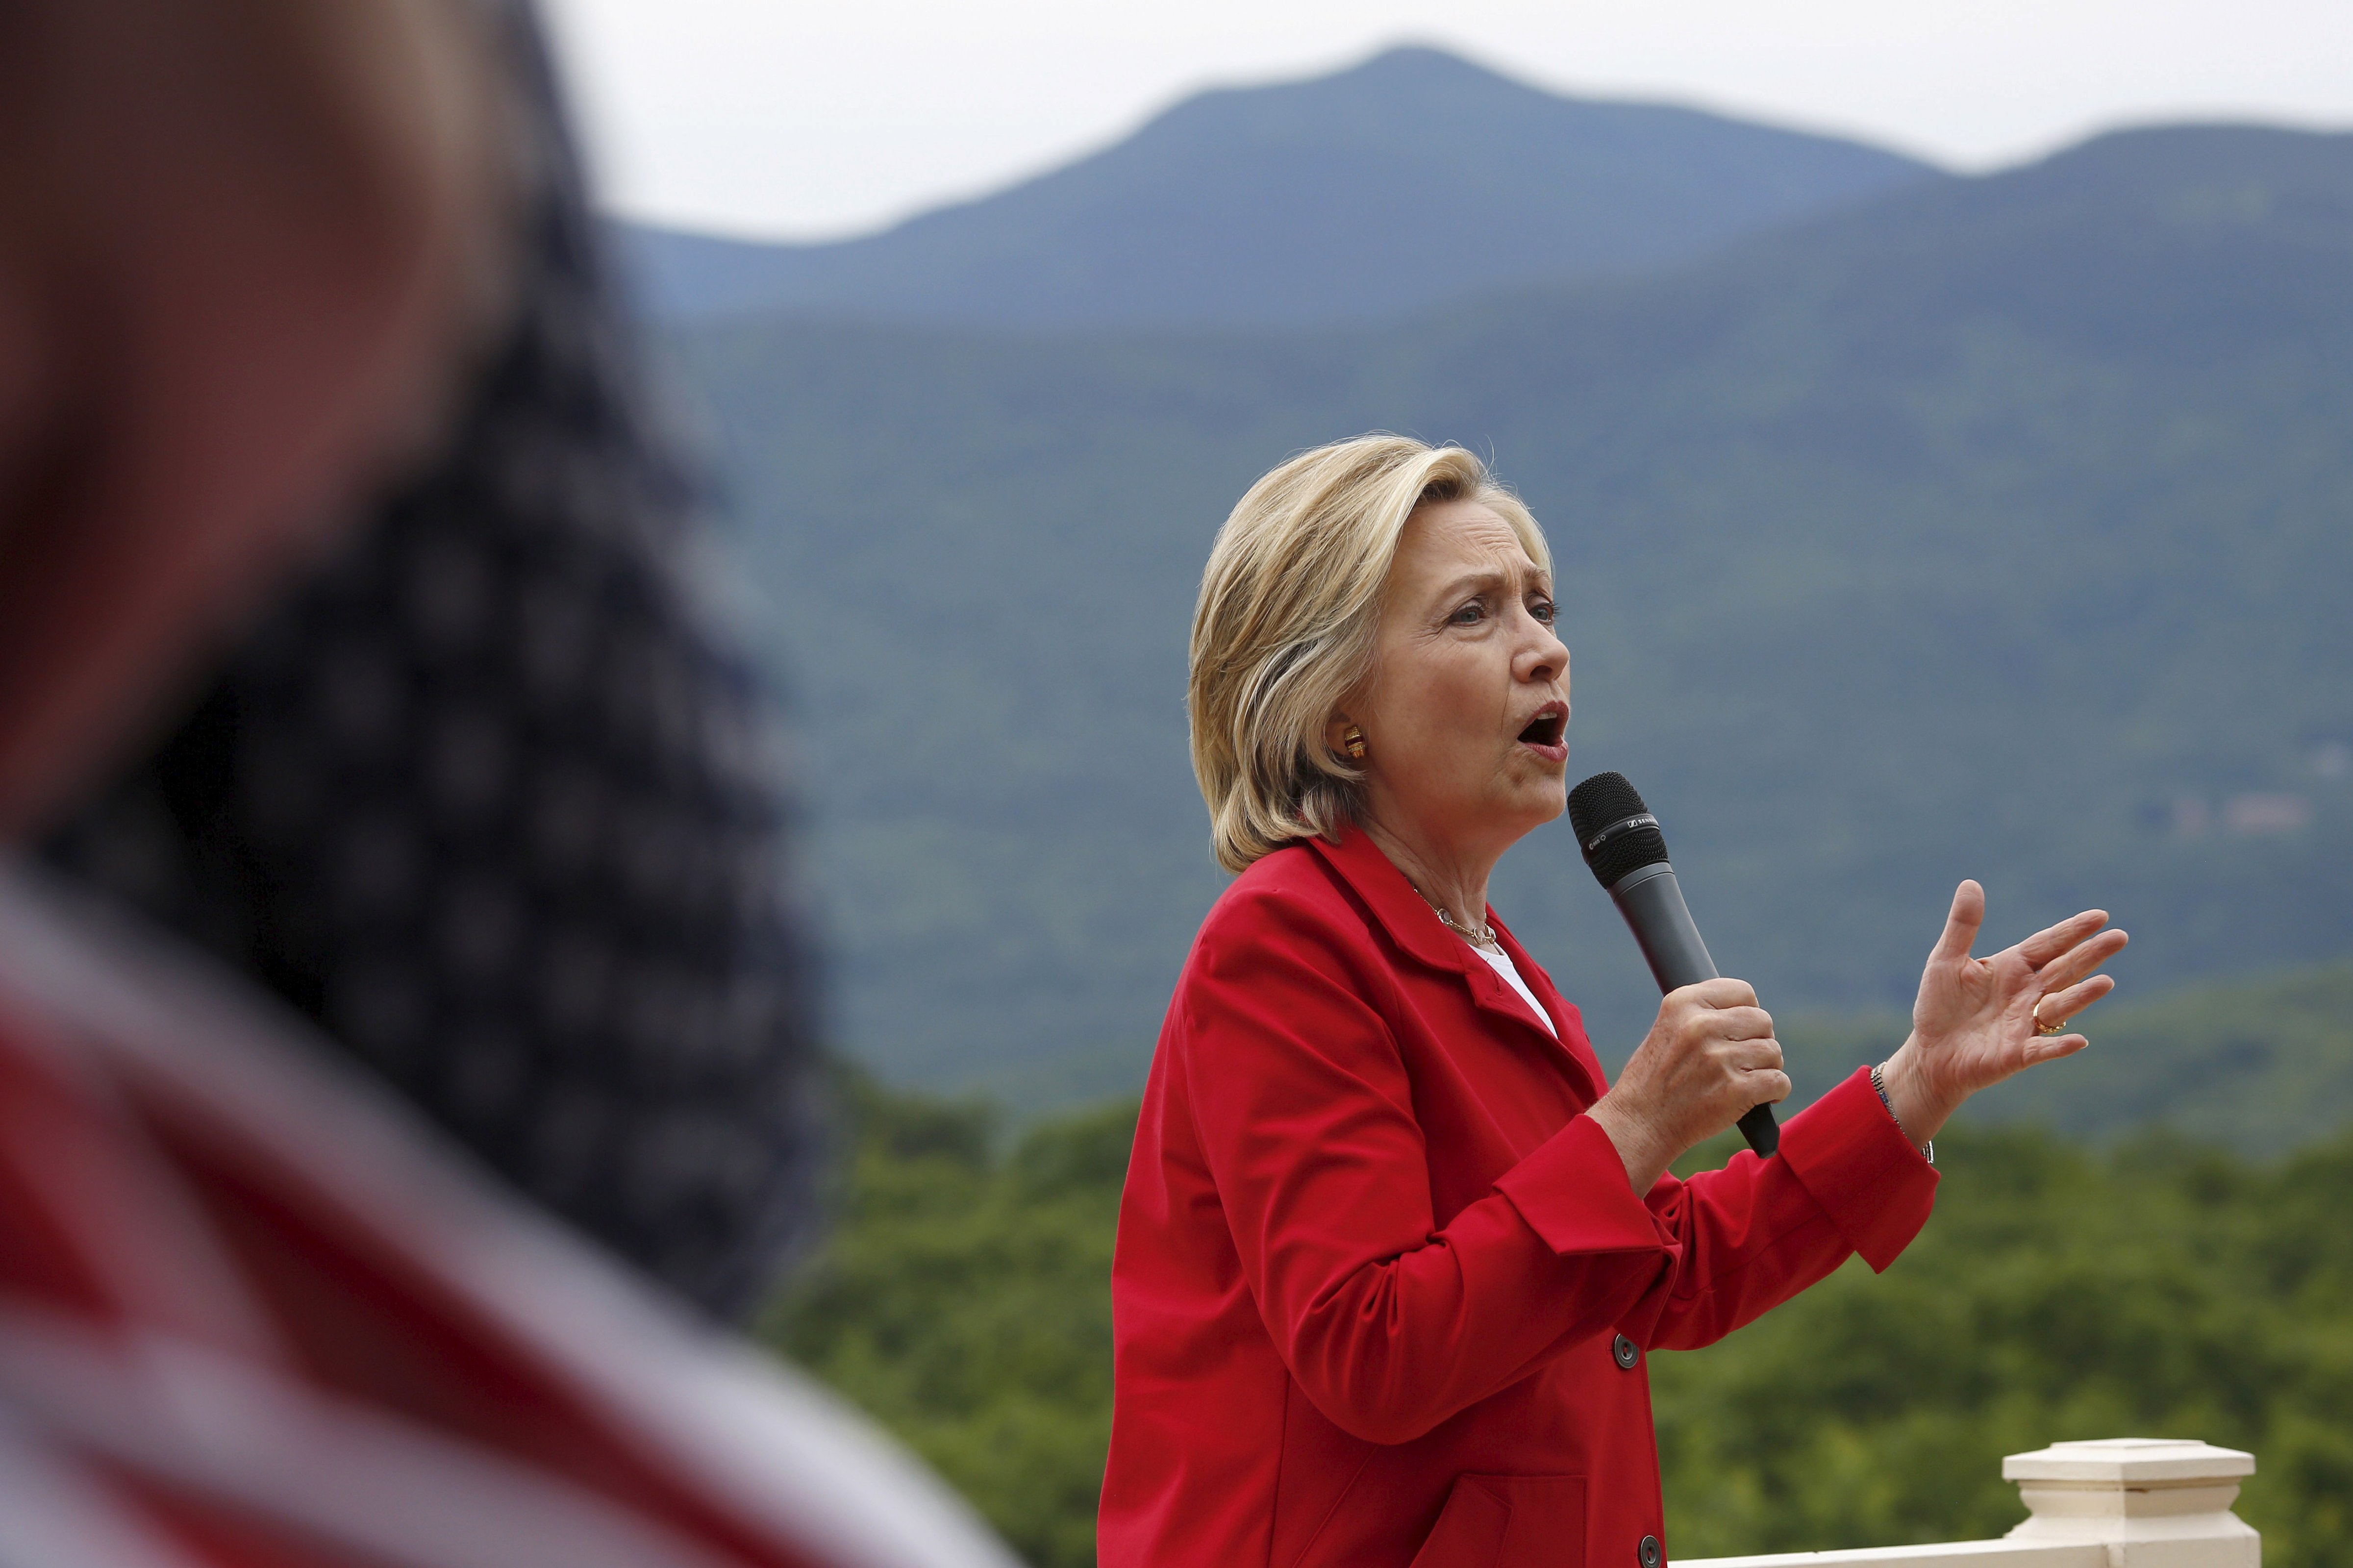 Former United States Secretary of State and Democratic candidate for president Hillary Clinton speaks to supporters during a campaign event in Glen